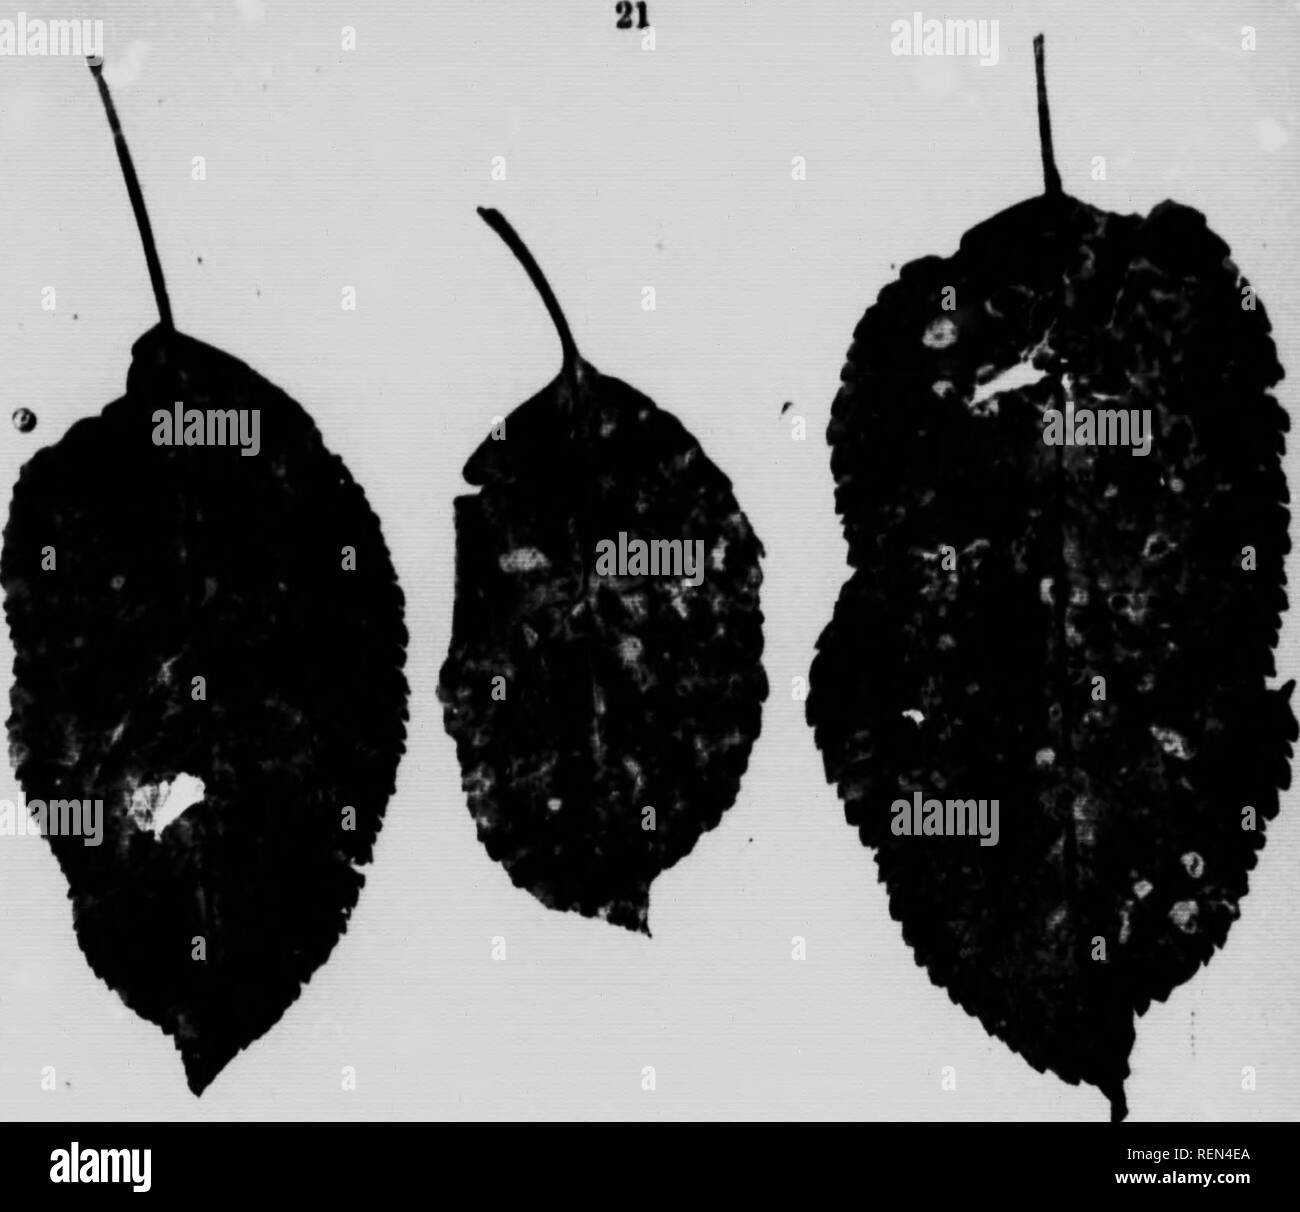 . Common insects affecting fruit-trees [microform]. Insect pests; Fruits; Insectes nuisibles; Fruit. Fig. 33. Ai-pl* le«Te» affeoted with Le«f Siiot (I'hyllotticfa pirino). Black Rot (Sphaeropsis mulorum). Fitf- 35- This is a serious pest of ripe apples. It attacks the leaves, twigs, stems and fruit. On the If .. es it appears as little brown spots much liUc the Apple Leaf-Spot disease On the twips or stems it appears as blackish spots and the fruit when attacked turns at first reddish brown and later black. The sp«&gt;rcs consist of minute black bodies just under the skin. It differs from Bit Stock Photo